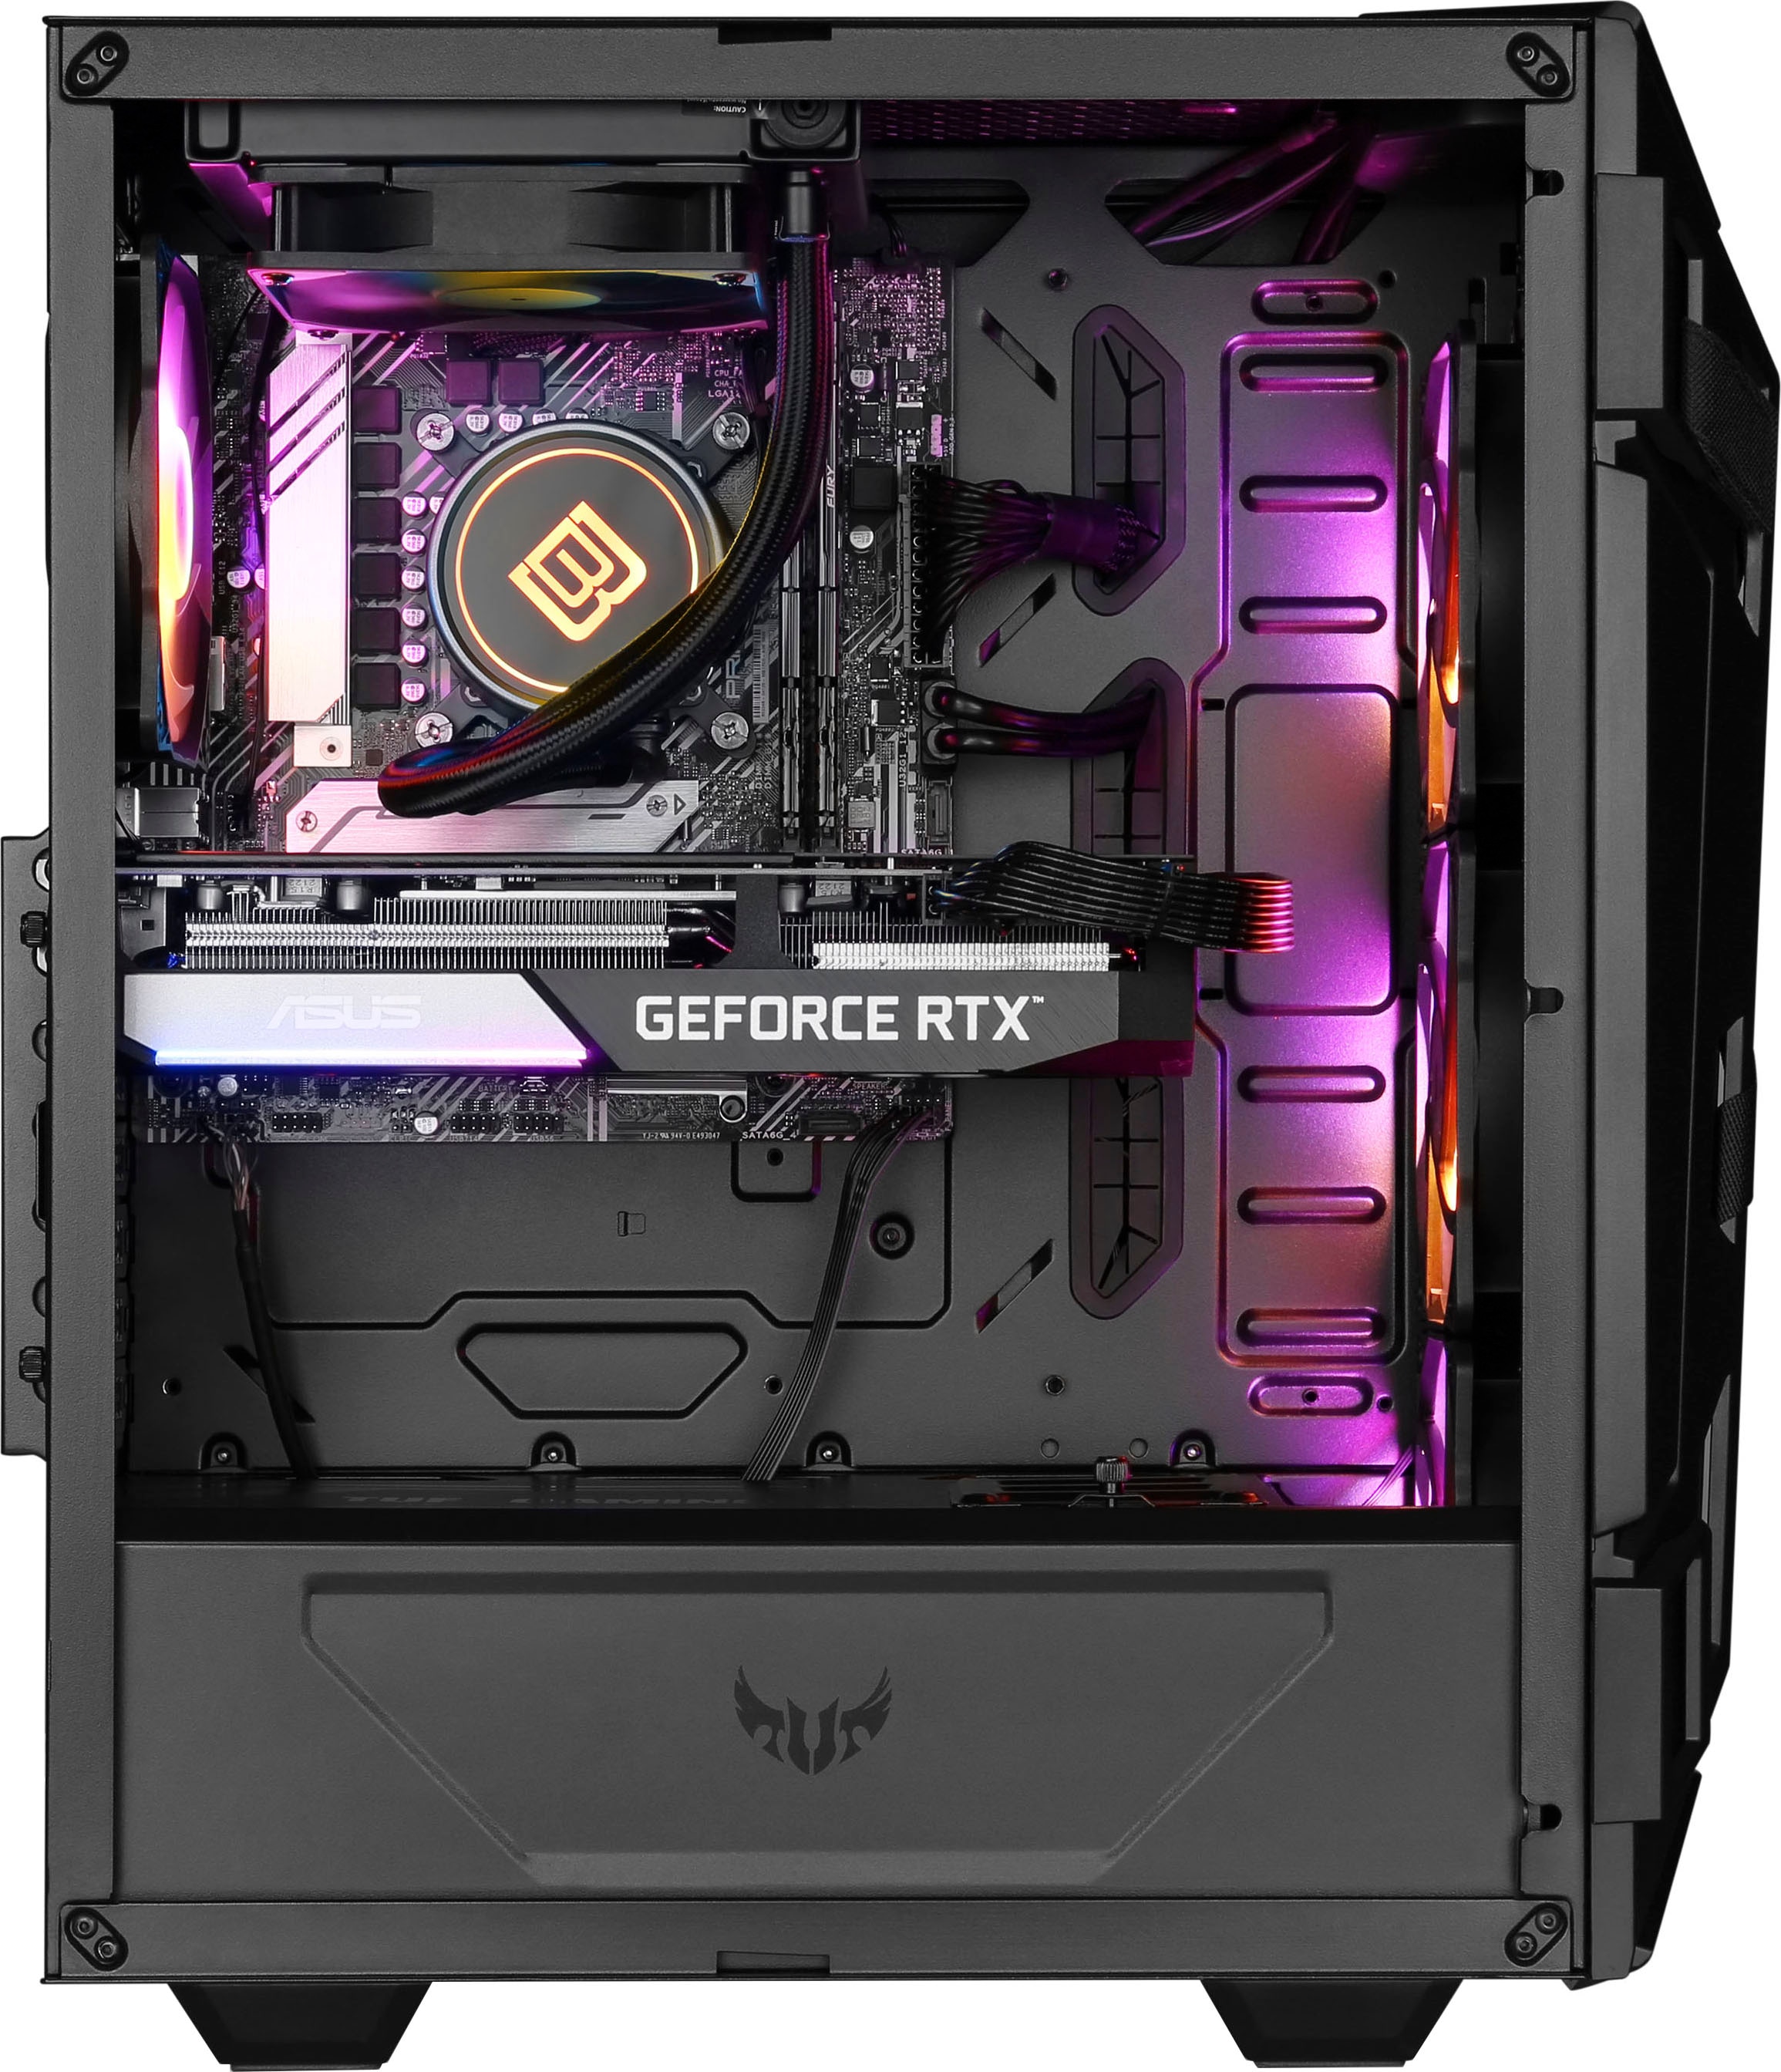 CSL Gaming-PC »HydroX L7110 ASUS TUF Limited«